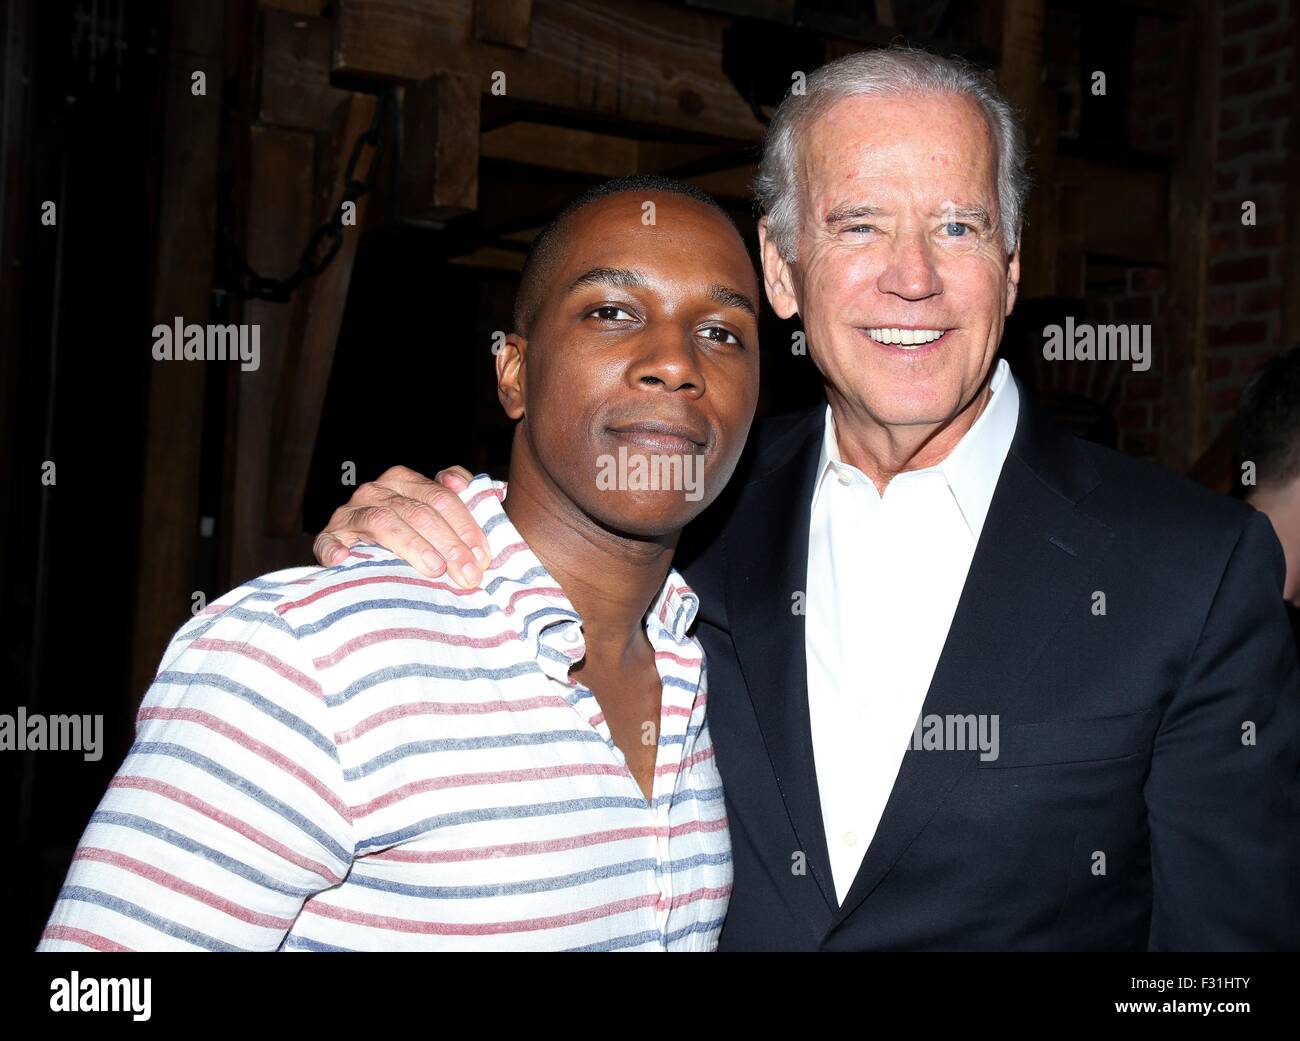 Telegraf Formuler frihed Vice President of the United States Joe Biden visits the cast of the  Broadway musical Hamilton at the Richard Rodgers Theatre. Featuring: Leslie  Odom Jr., Joe Biden Where: New York City, New